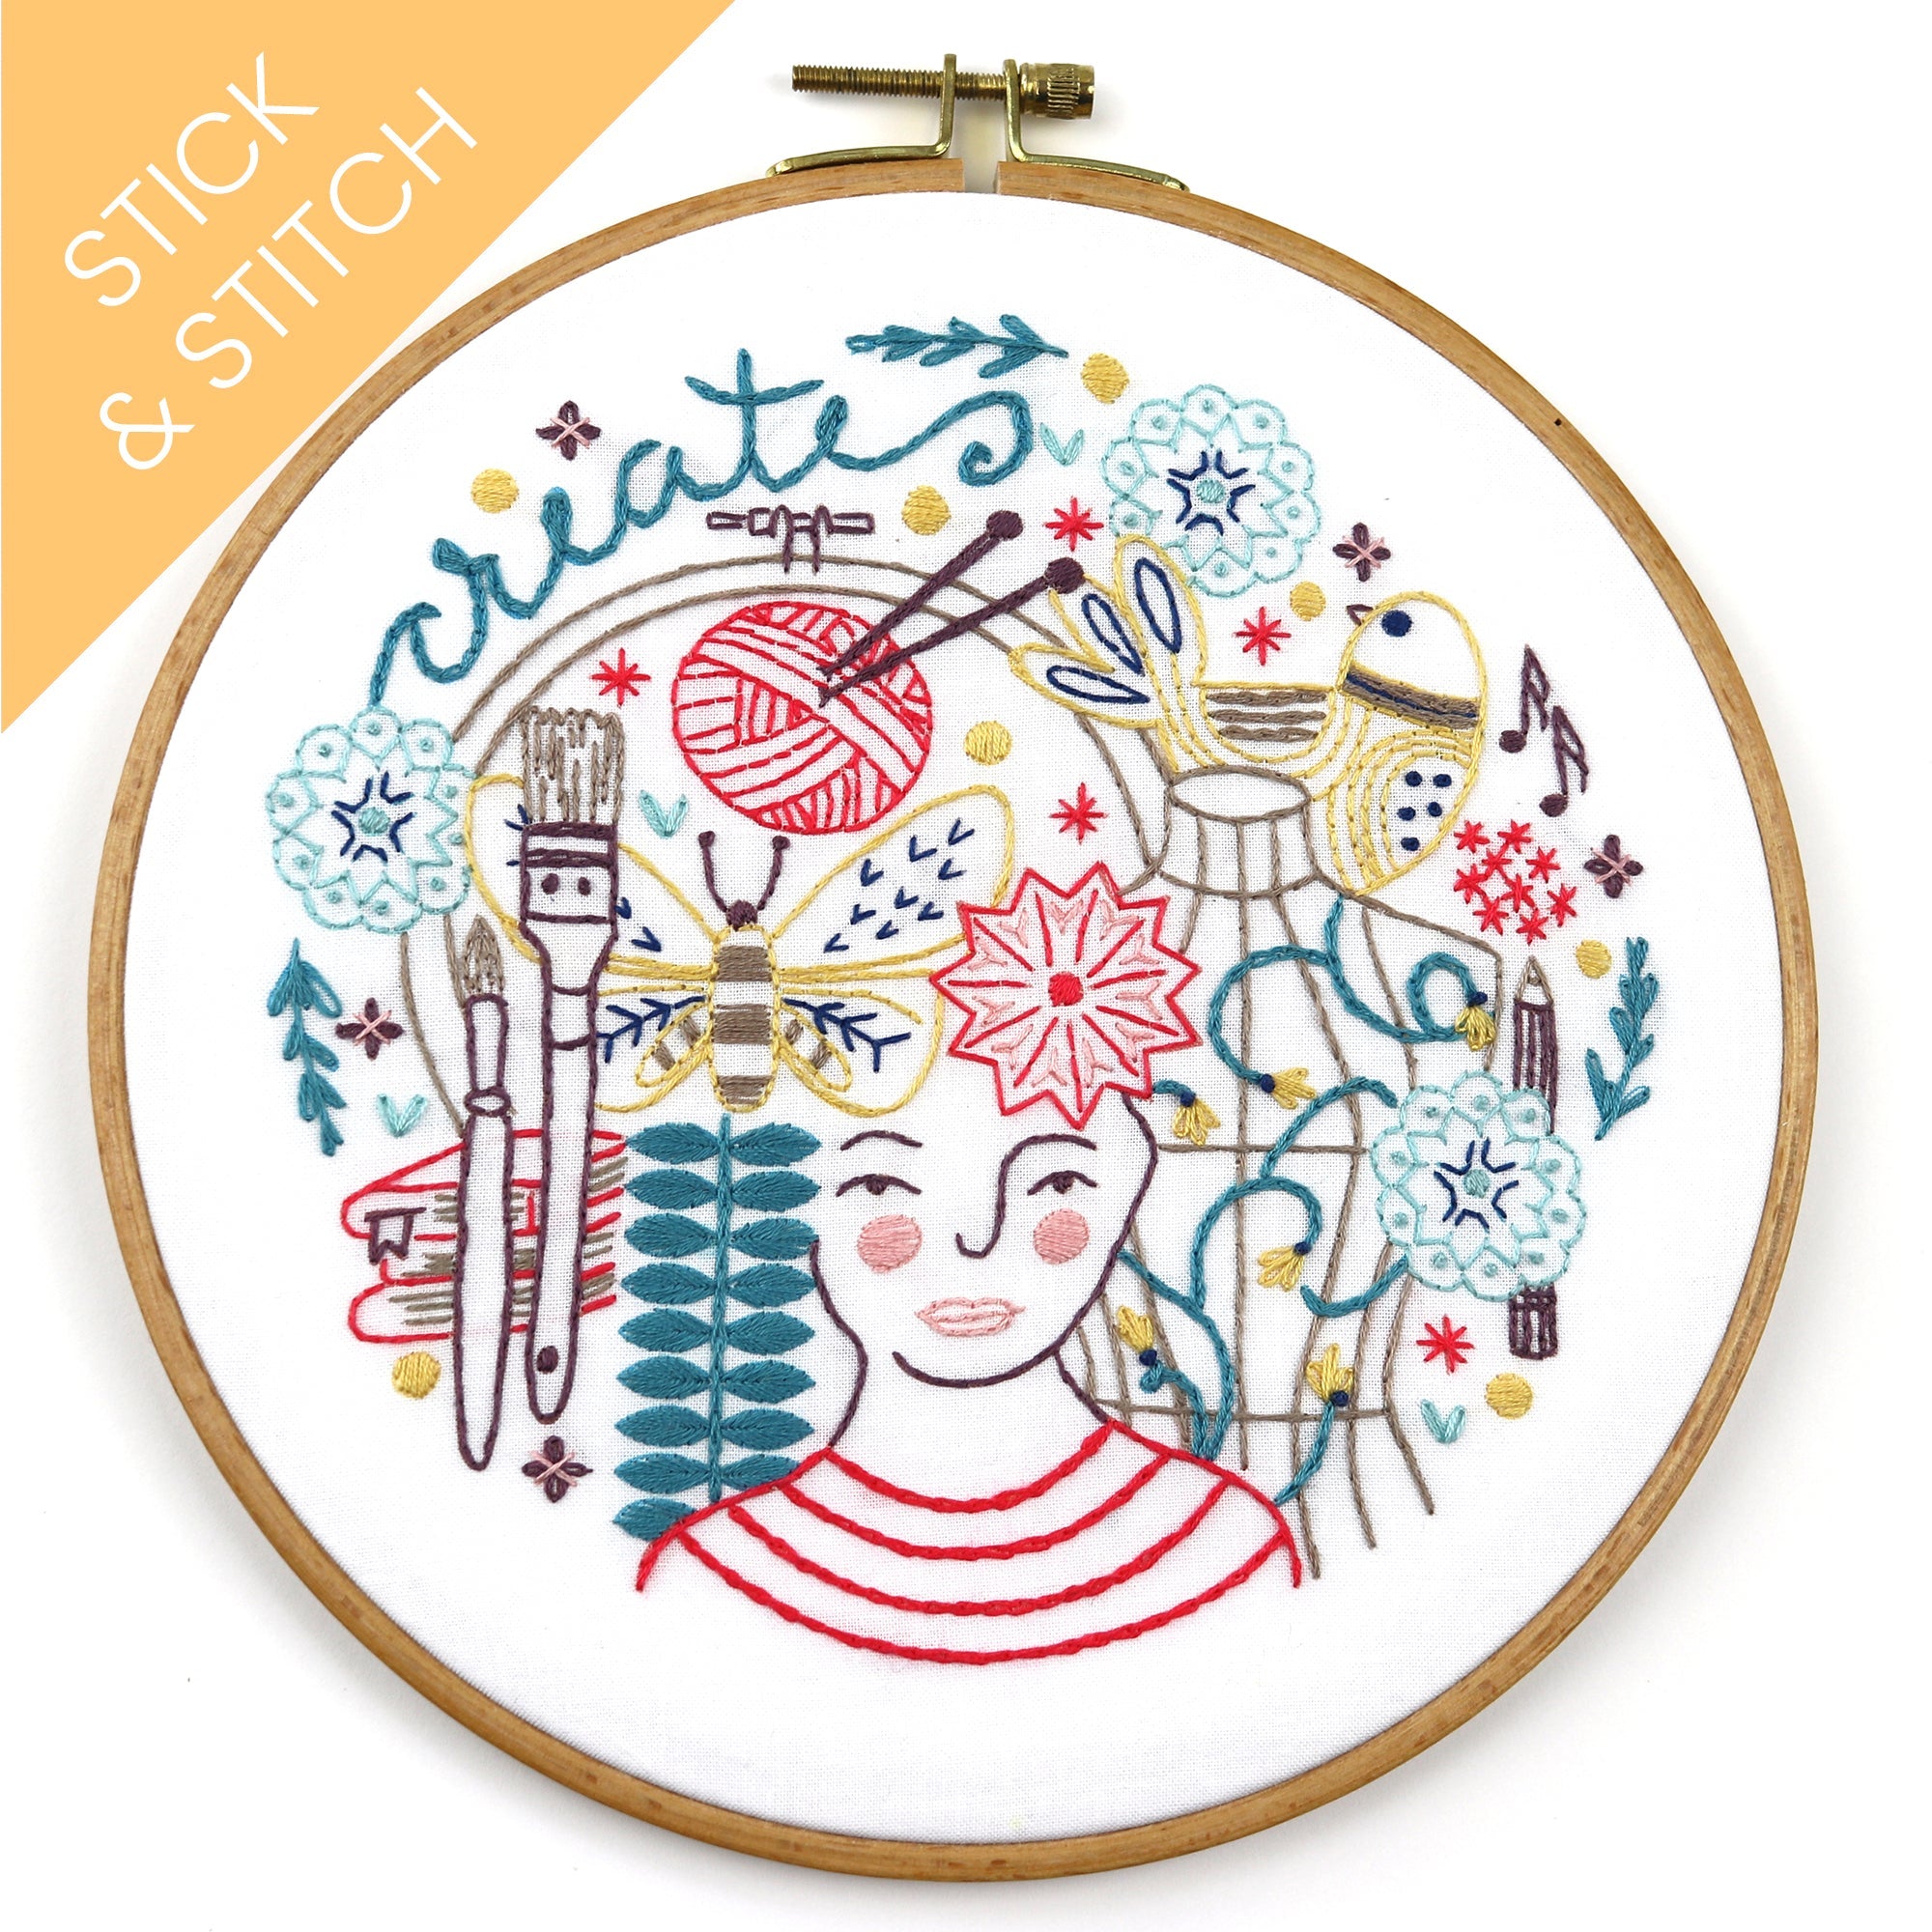 Embroidered Greeting Cards in the Hoop - We'll Teach You How! - Sulky